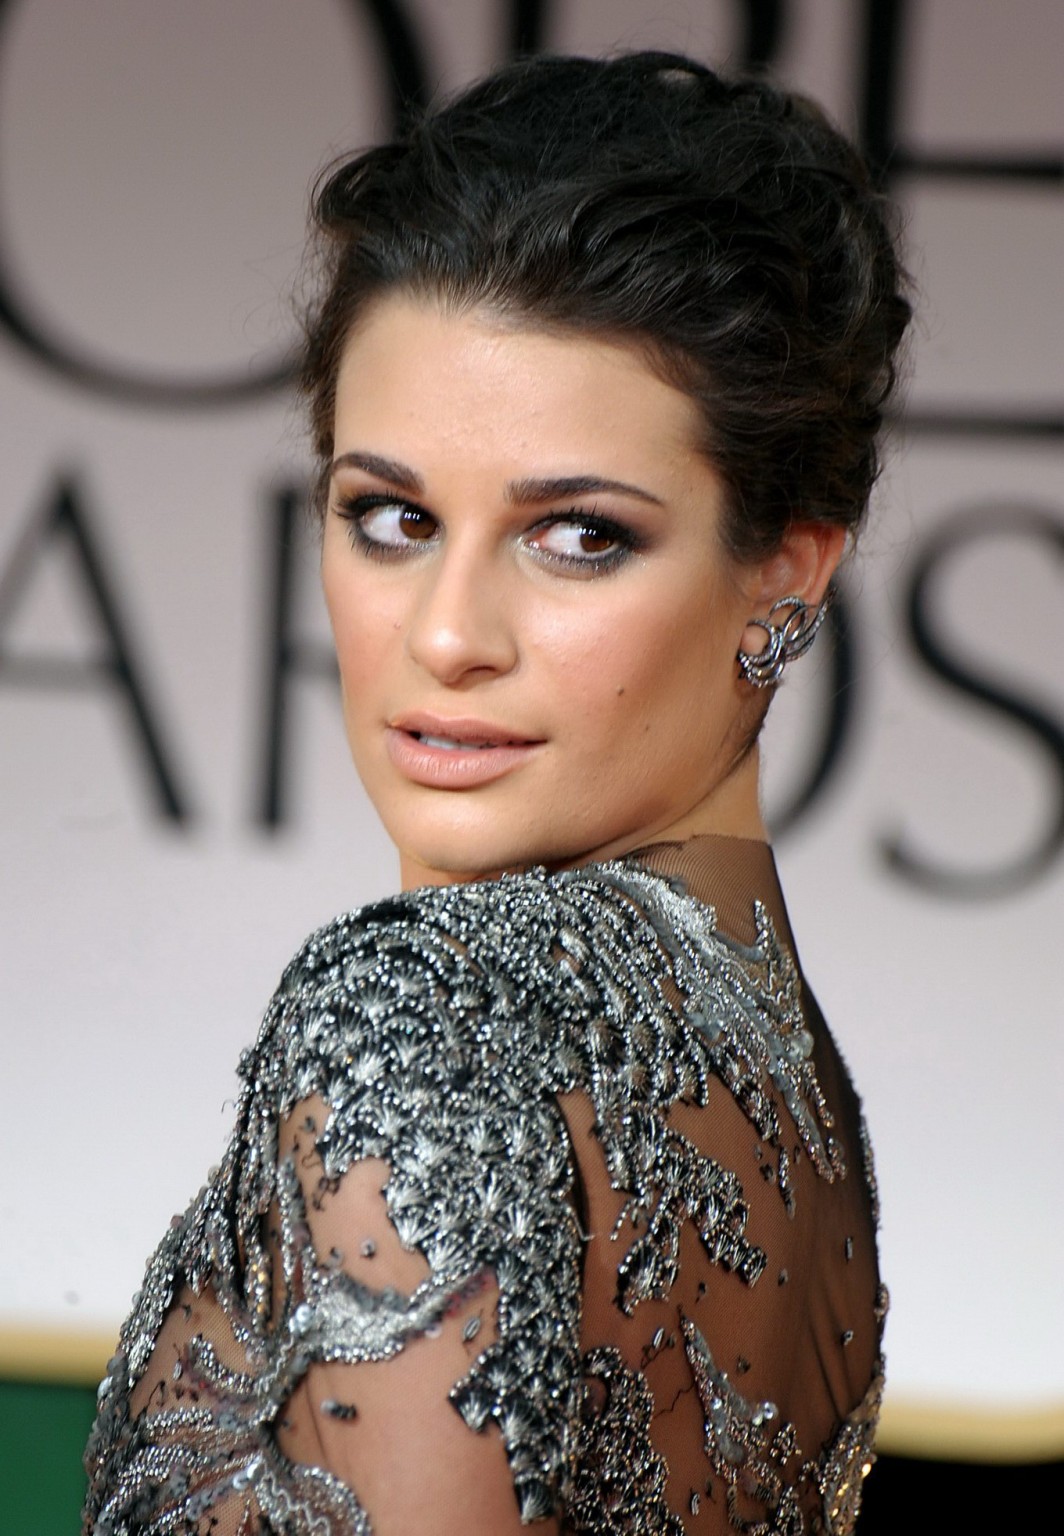 Lea Michele wearing see through lace dress at the Golden Globes 2012 #75276381